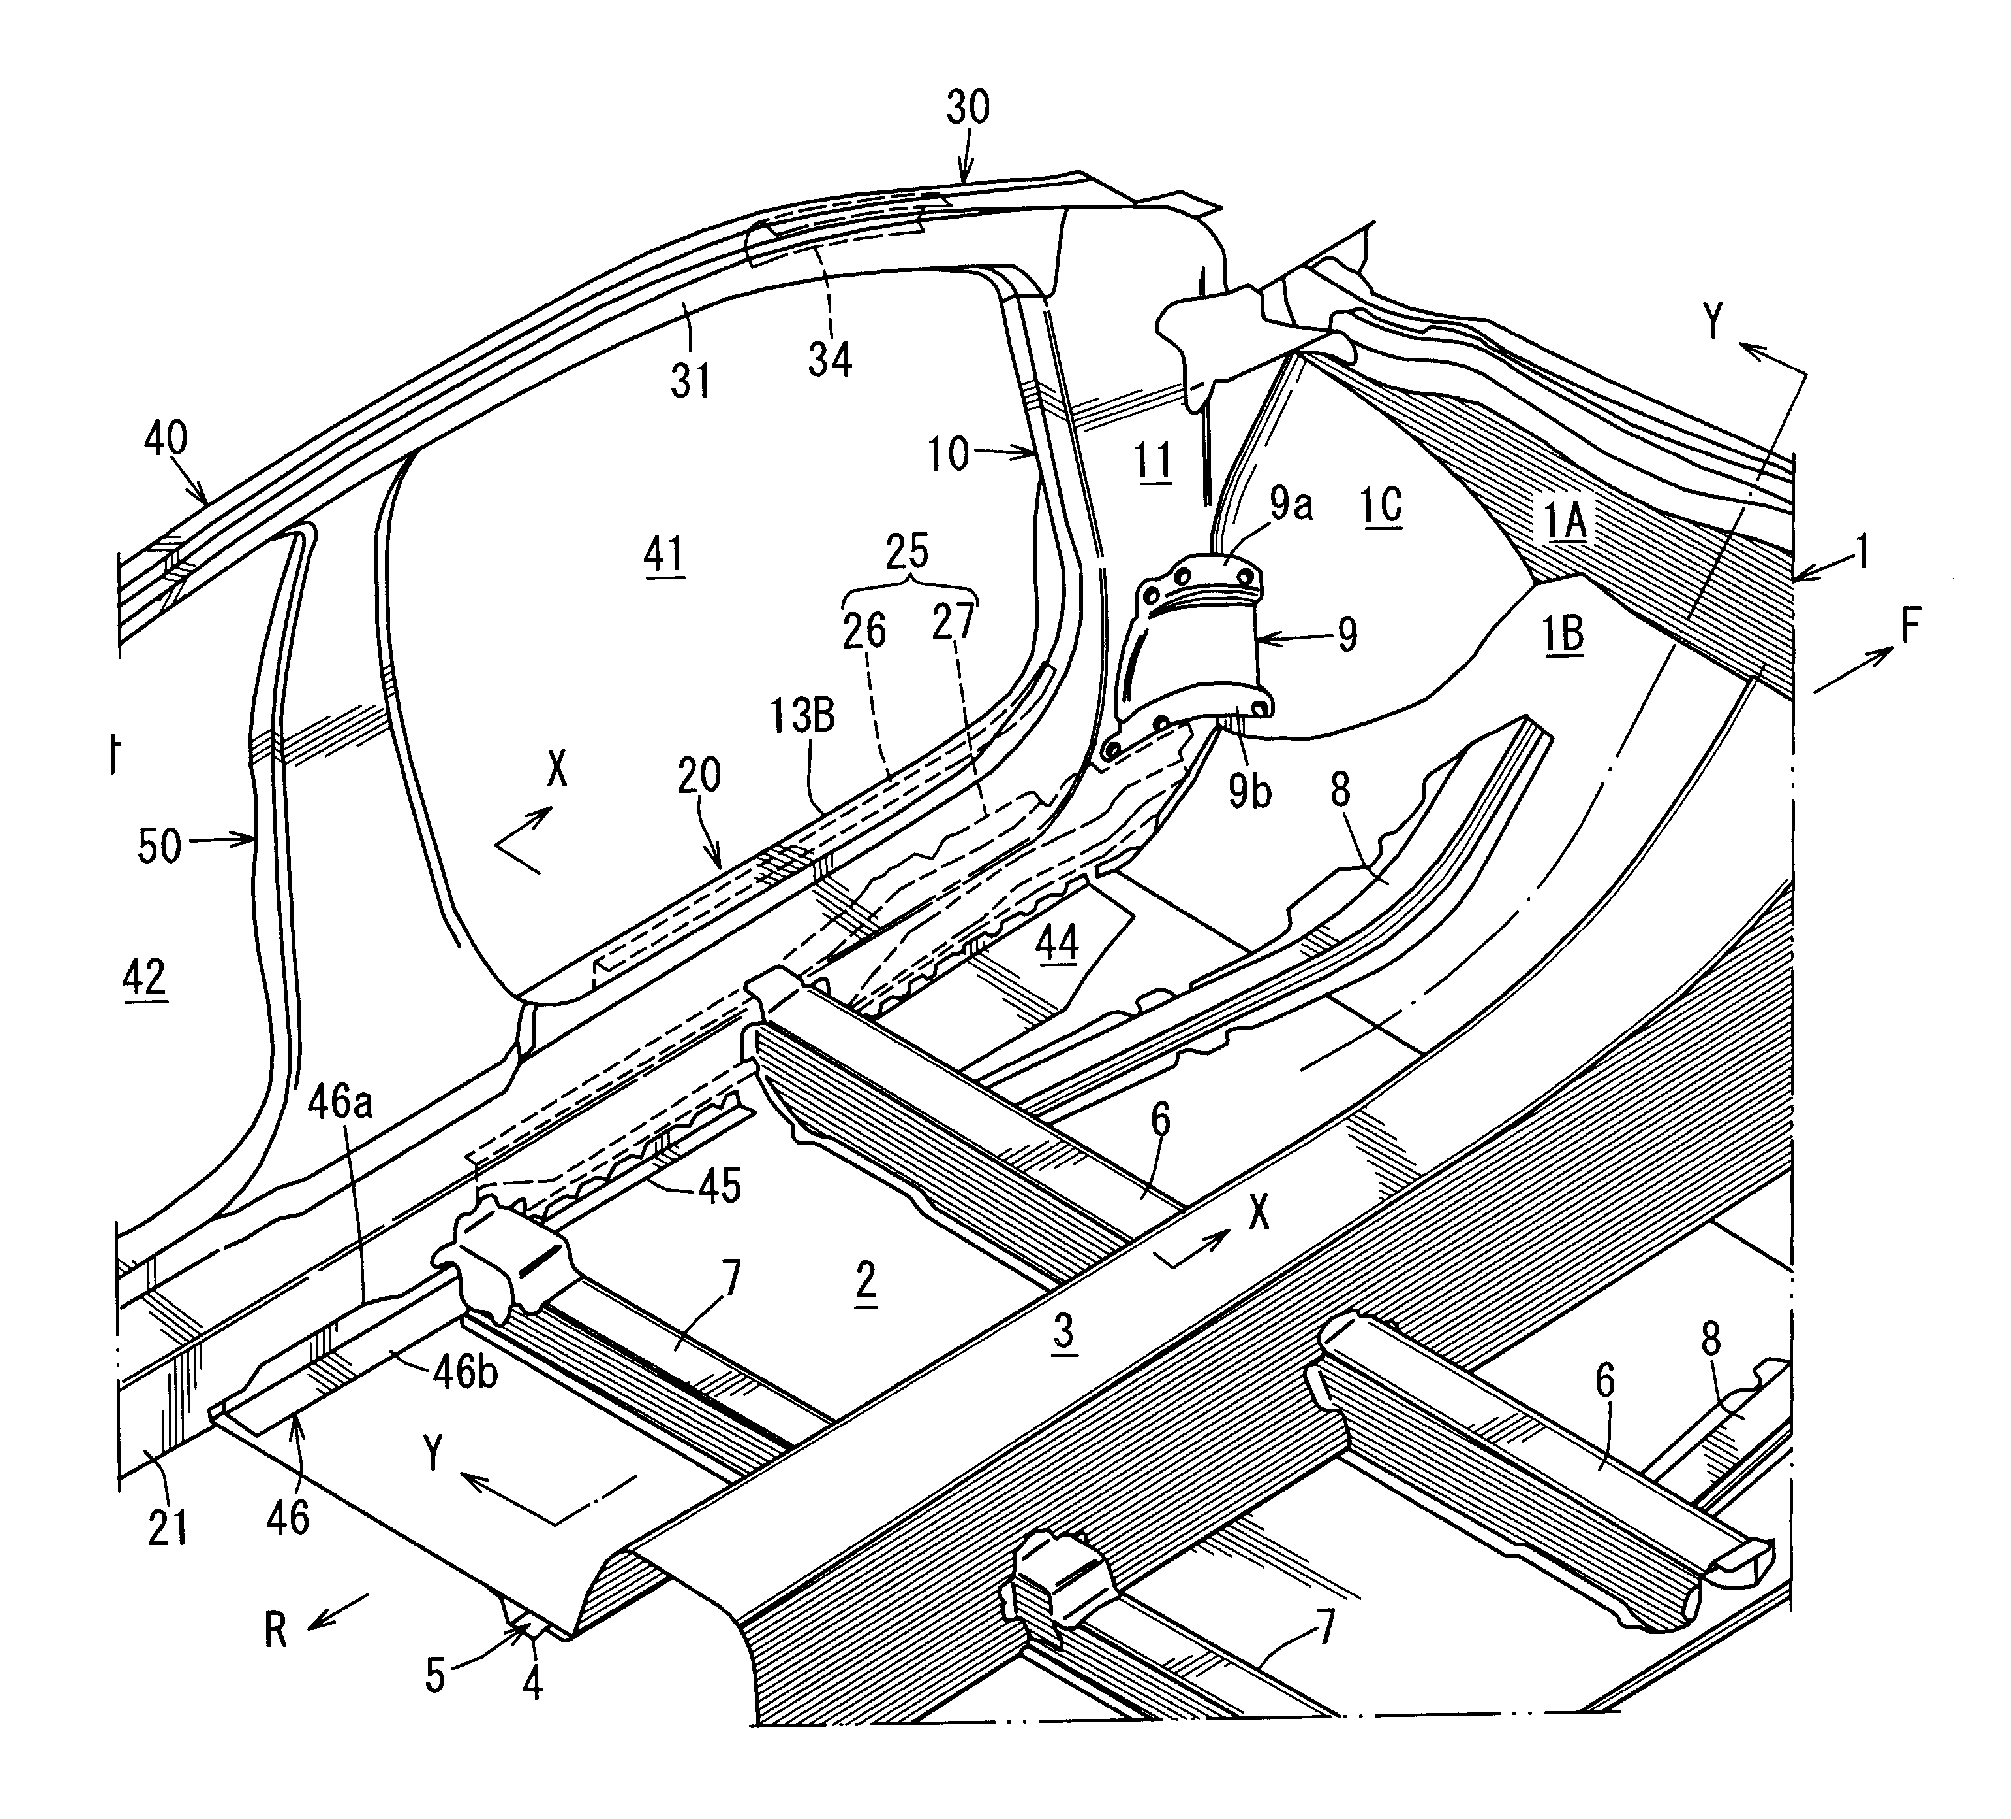 Lower vehicle-body structure of vehicle